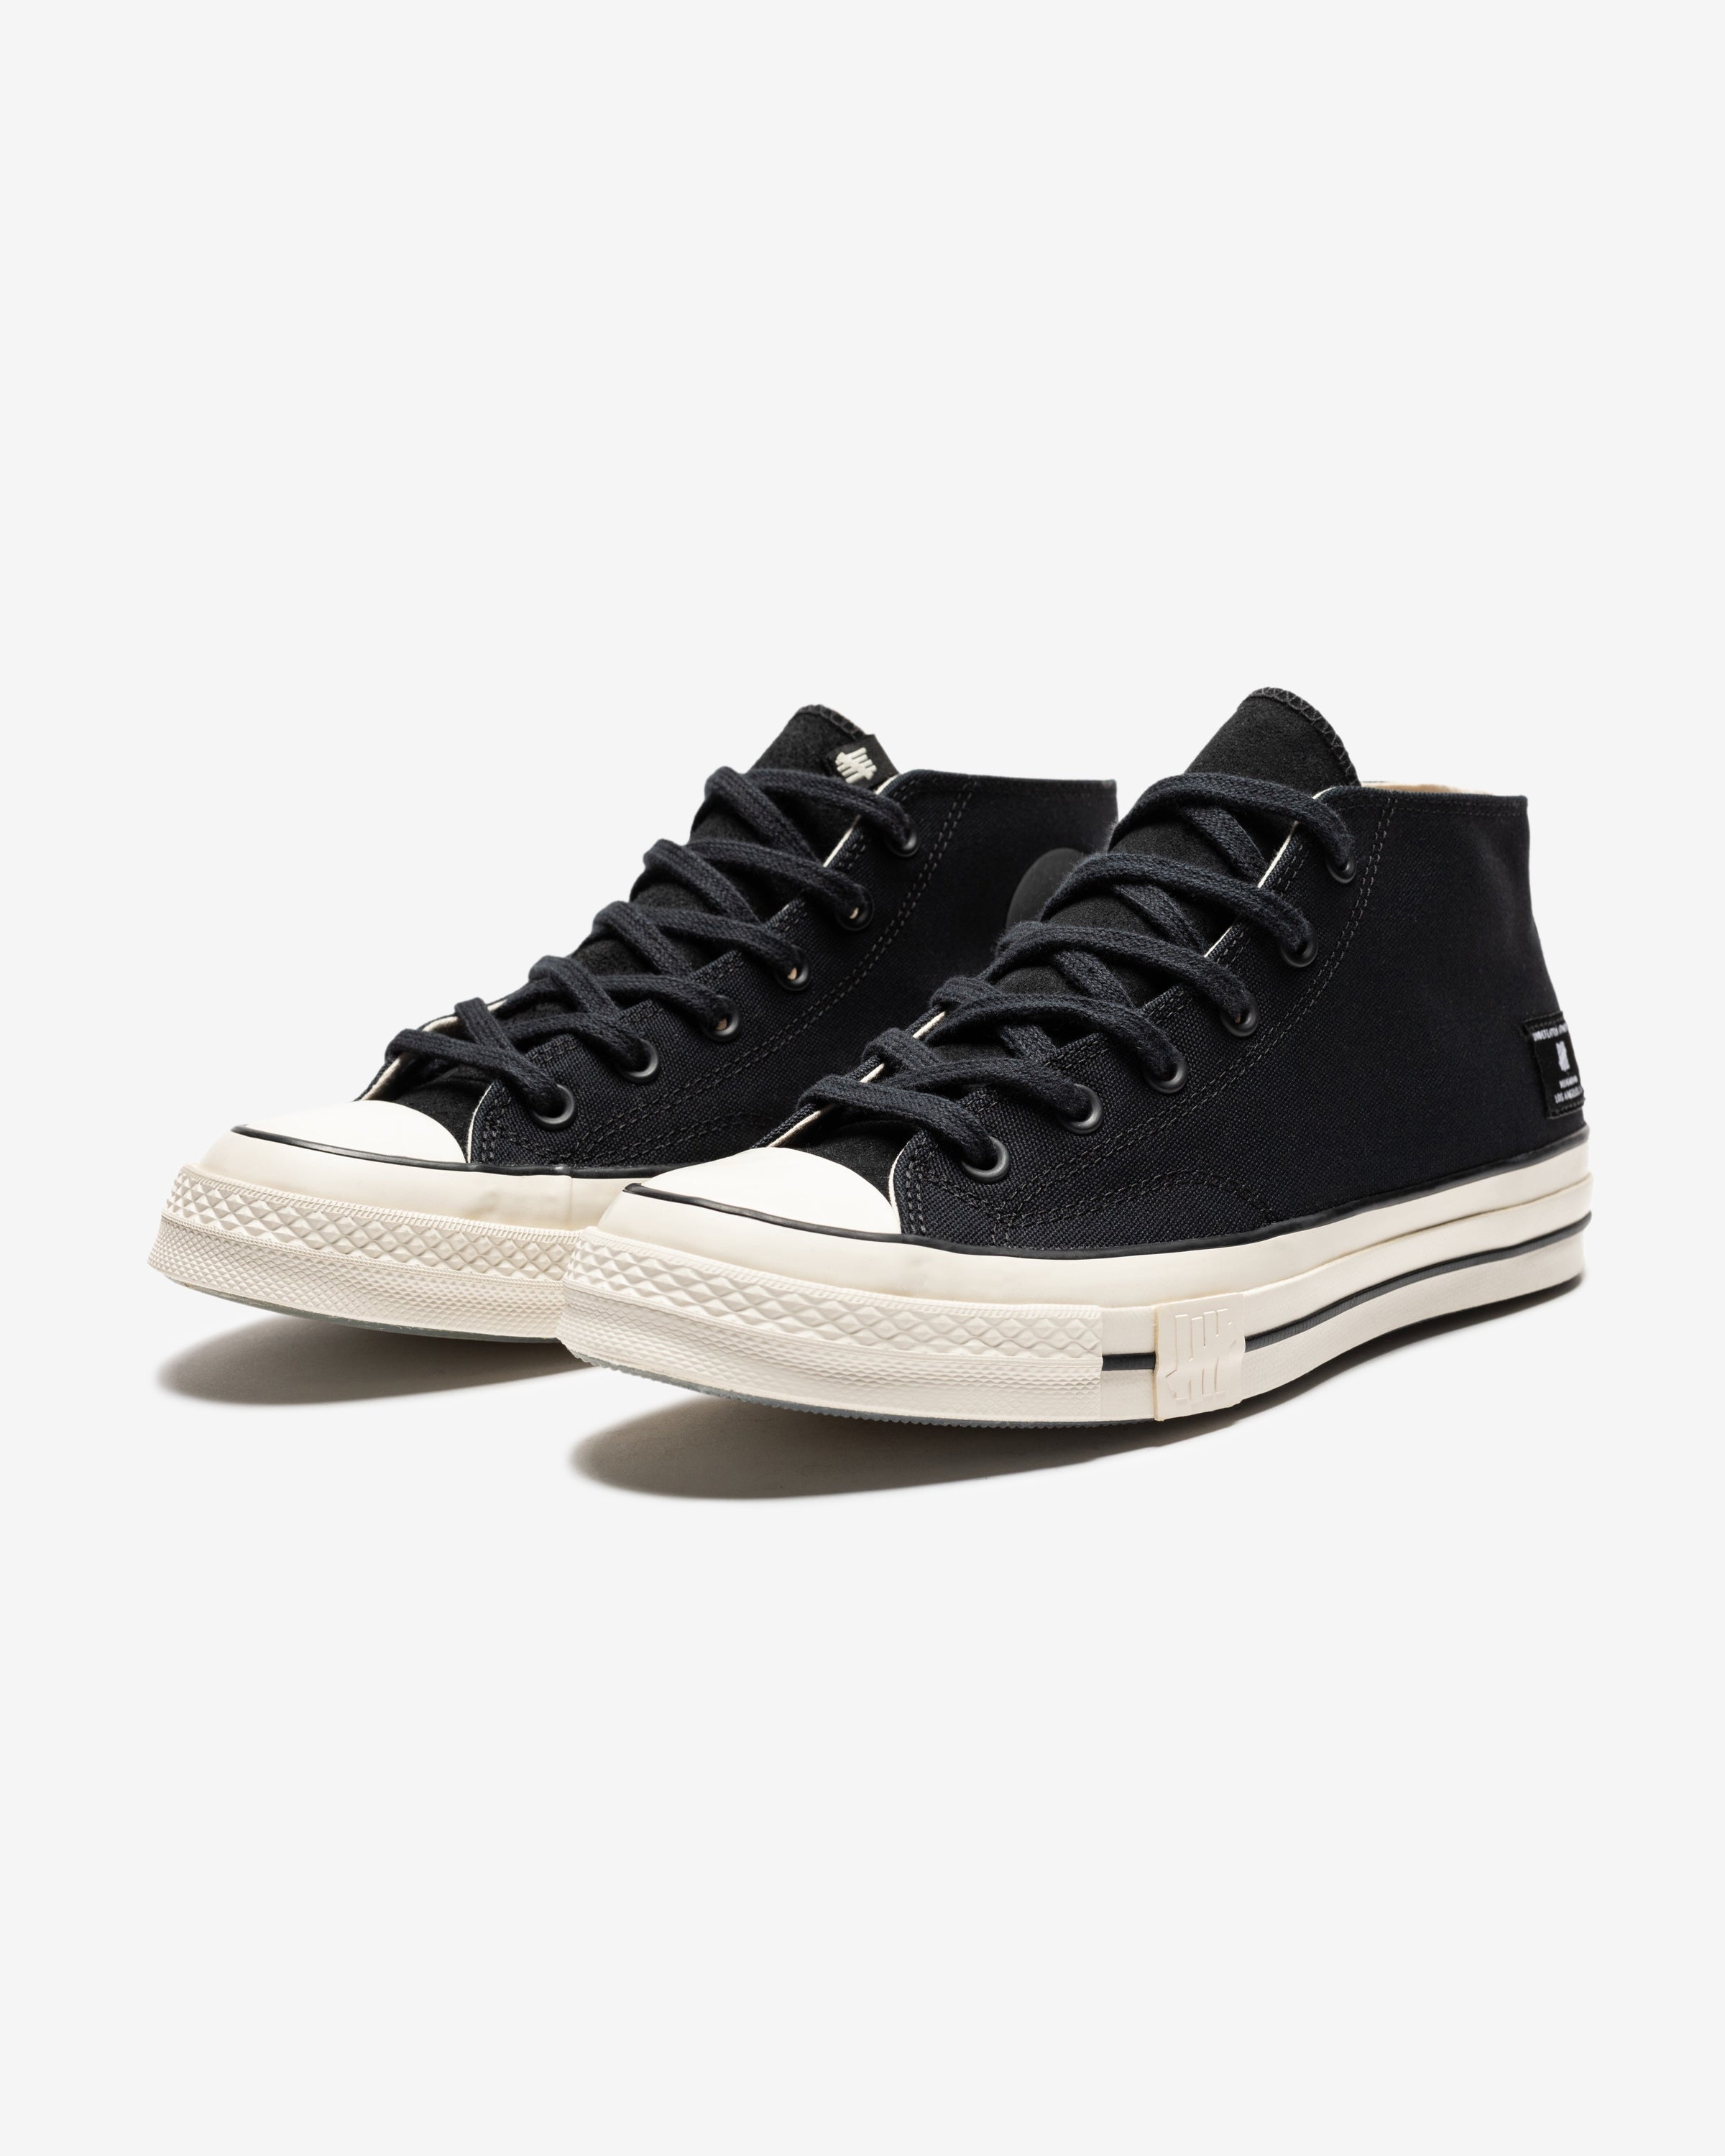 UNDEFEATED X CONVERSE CHUCK 70 MID- BLACK/ NATURALIVORY